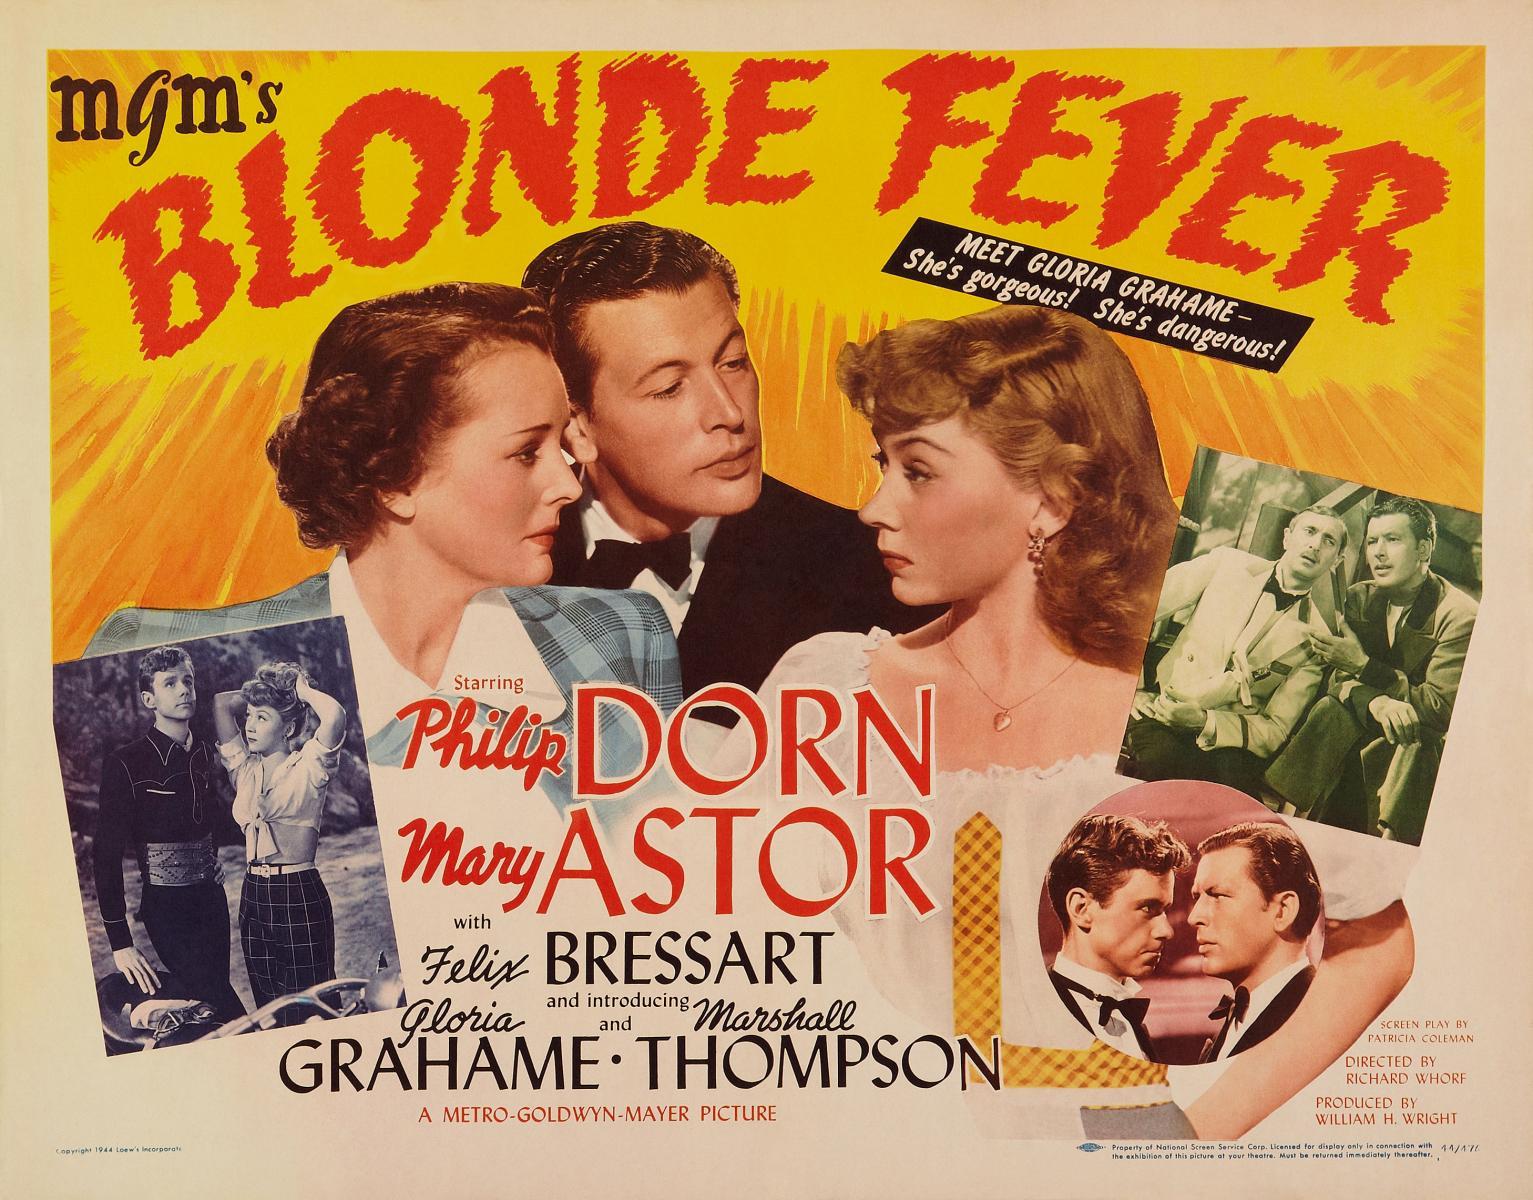 Blonde Fever  - Posters